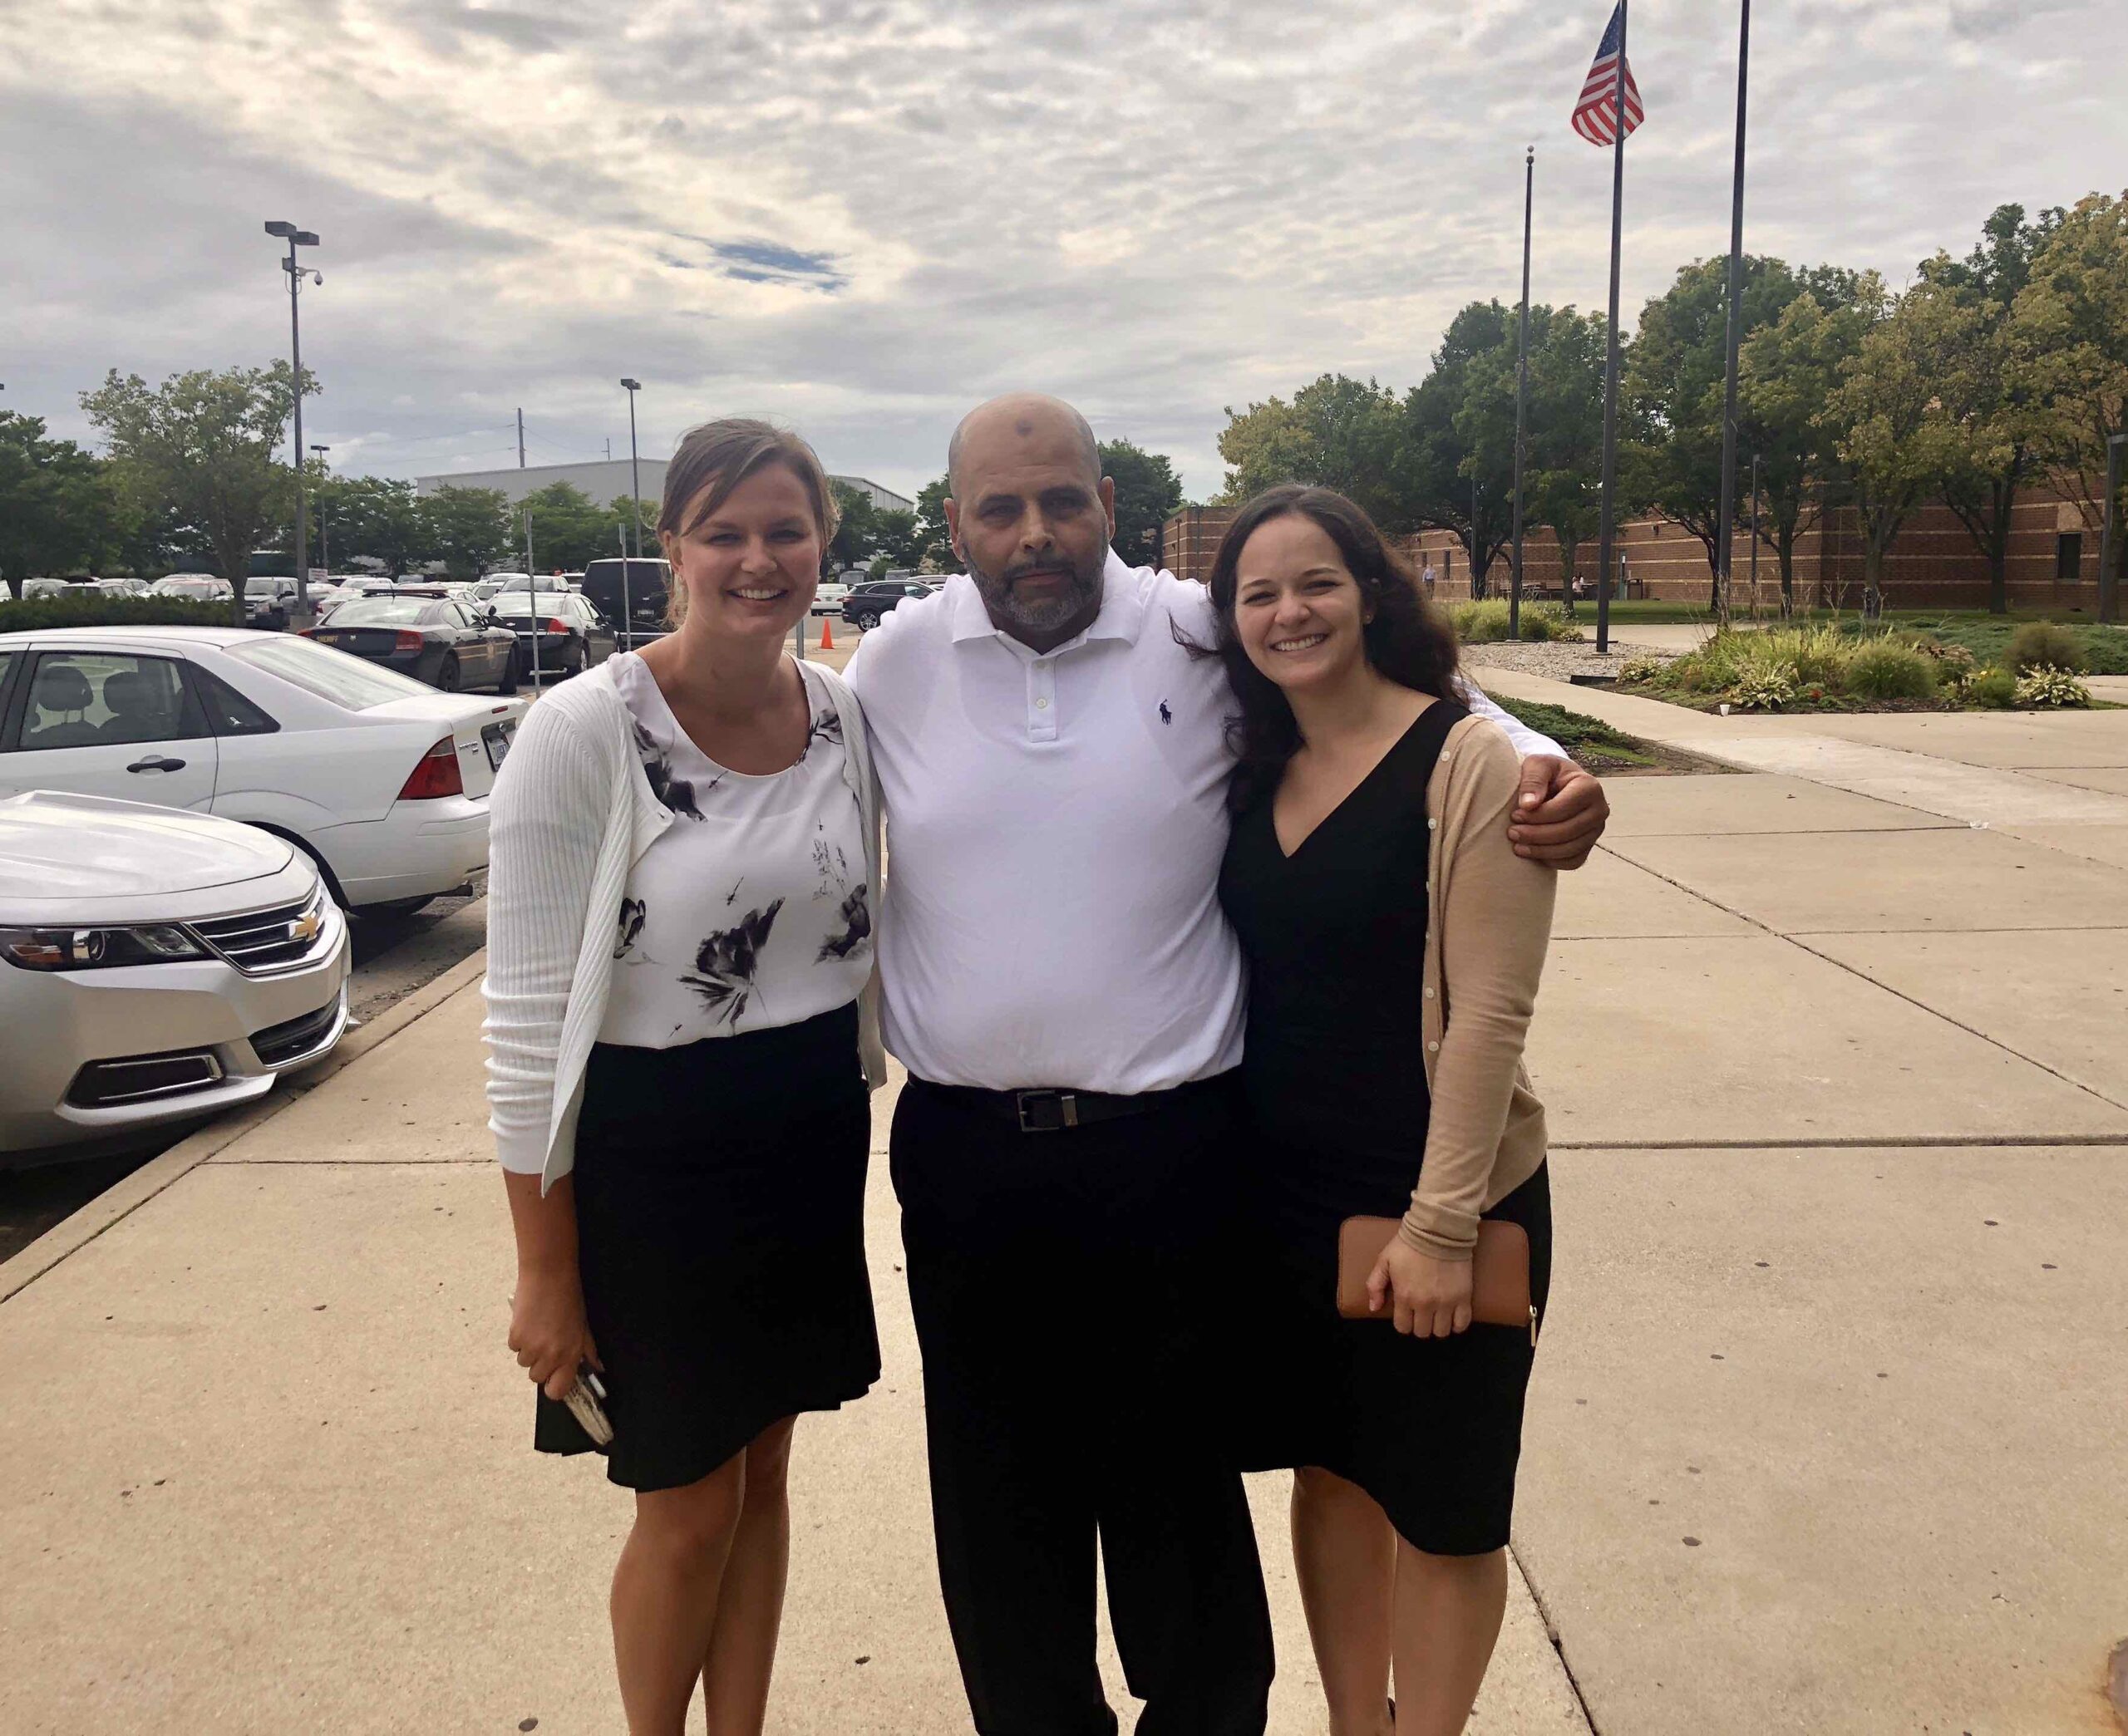 Mubarez Ahmed after his release on 9/6/18 with Sara Stappert (left) and Carolina Velarde, two law students who worked on his case. Photo courtesy of the Michigan Innocence Clinic.